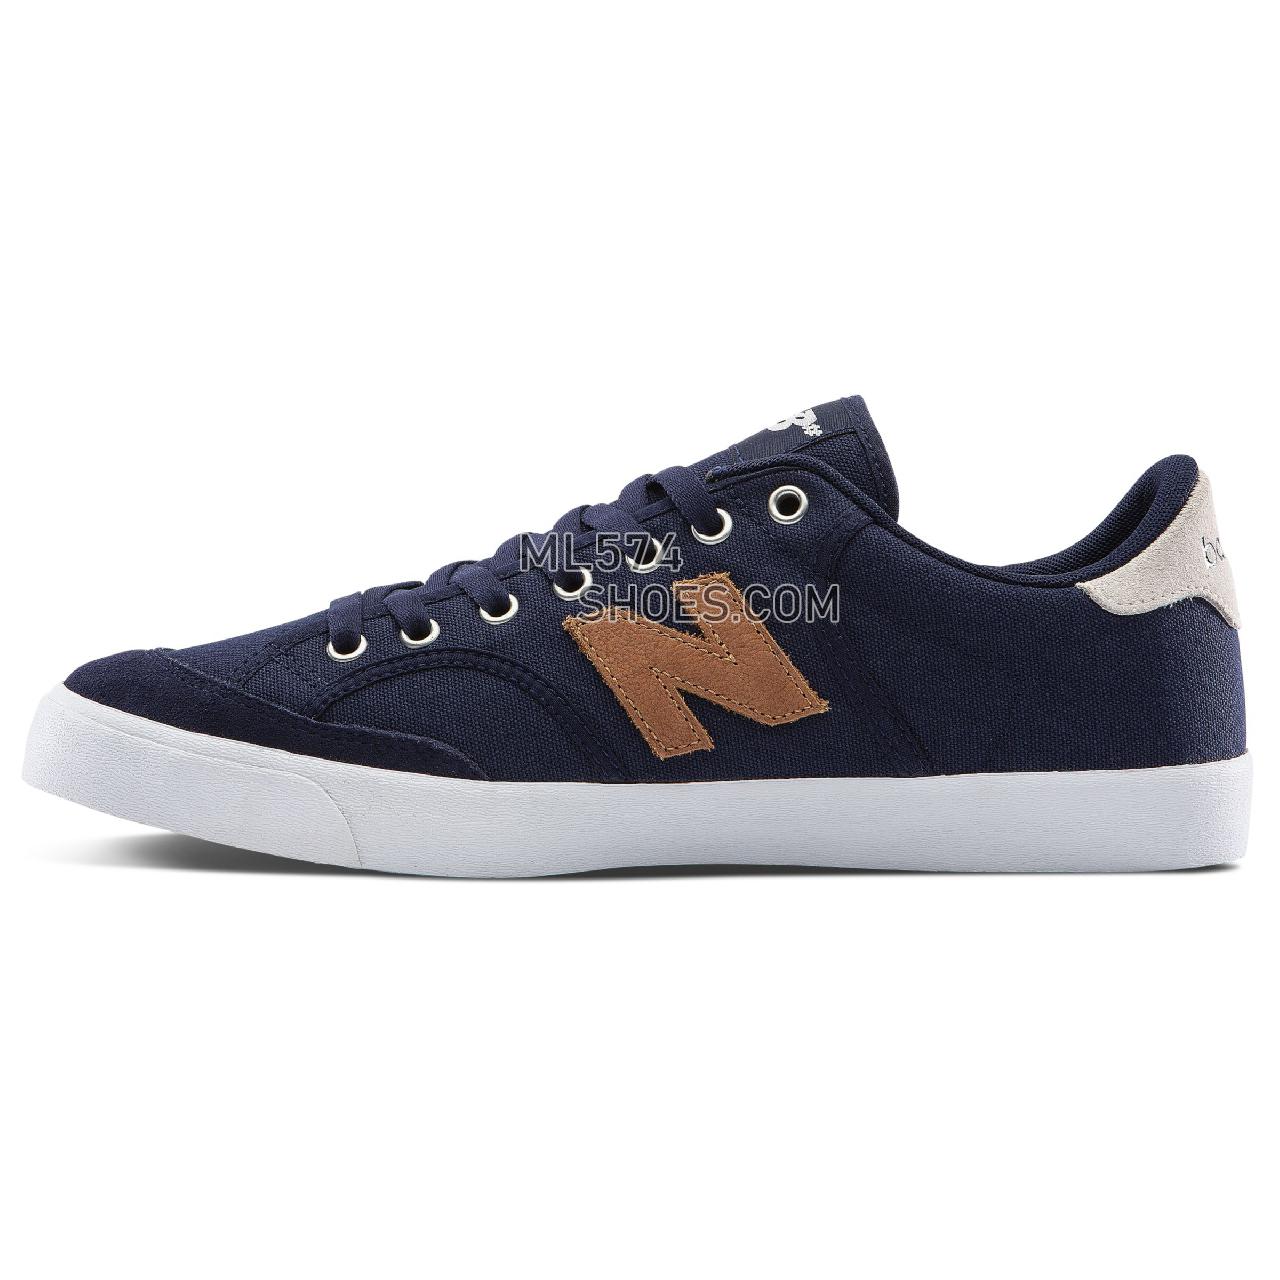 New Balance Pro Court 212 - Men's 212 - Classic Navy with Gold - NM212DKG